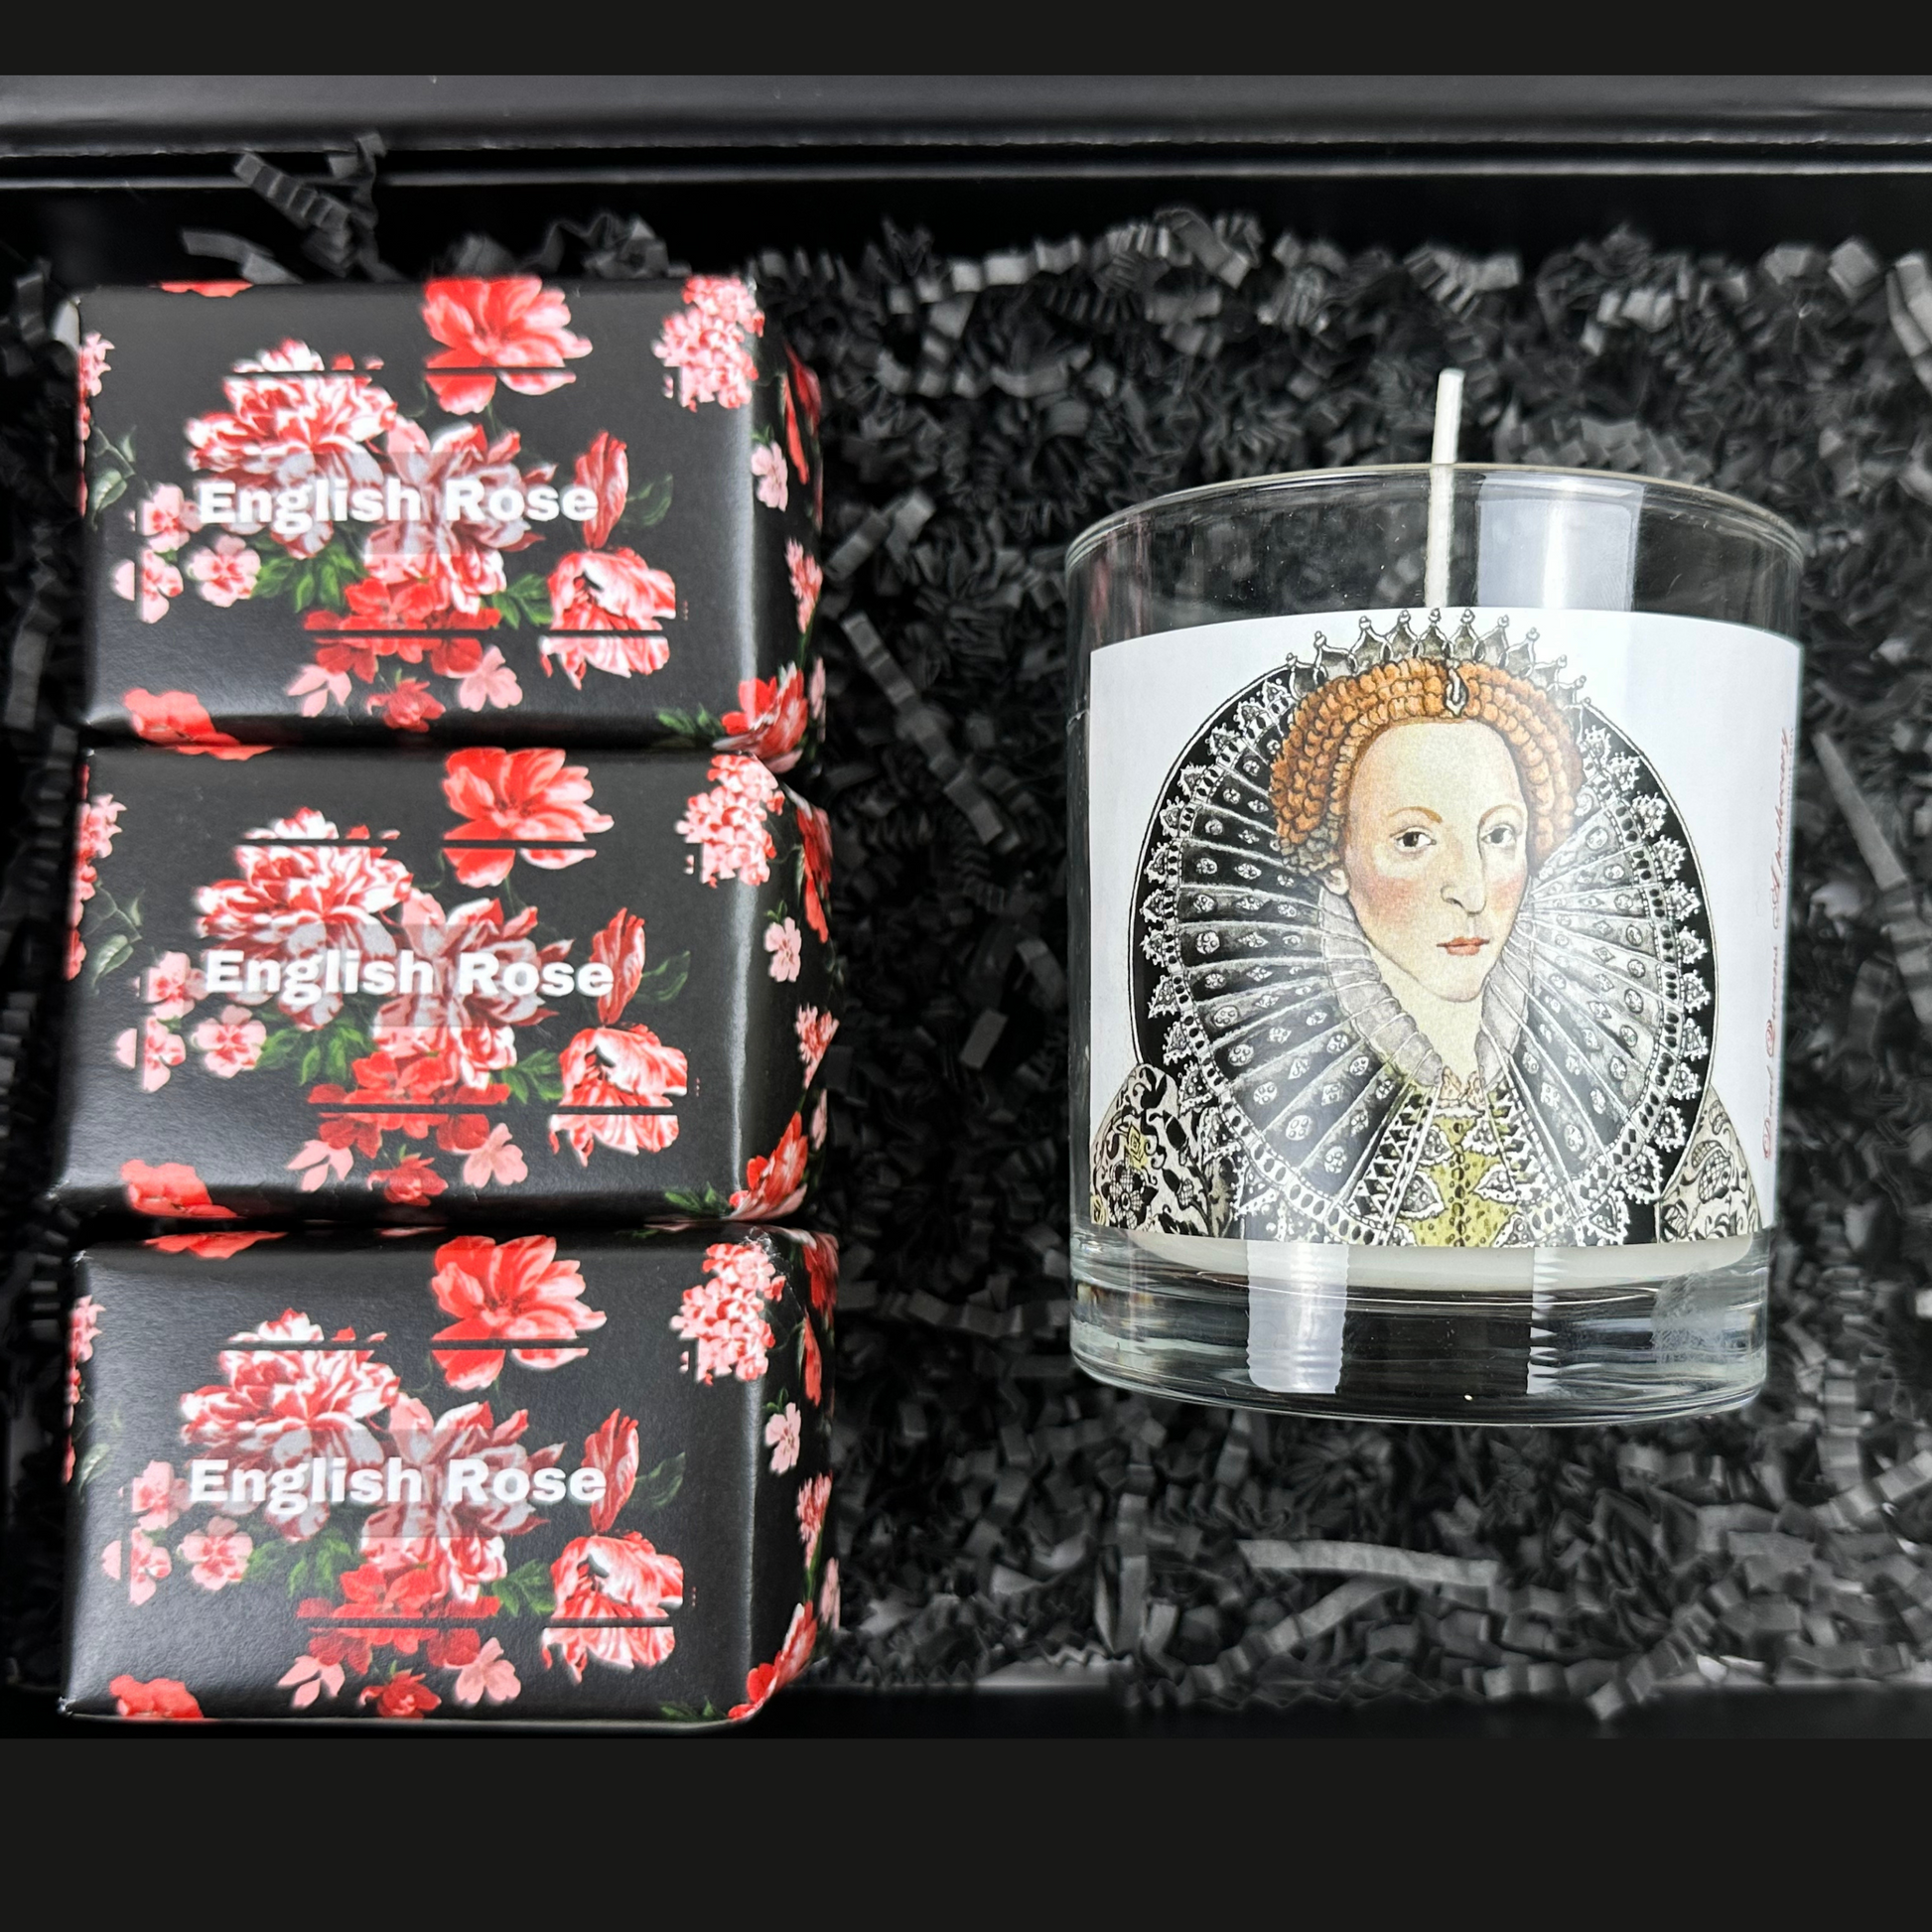 Queen Elizabeth Candle and three English Rose Soap Gift Box